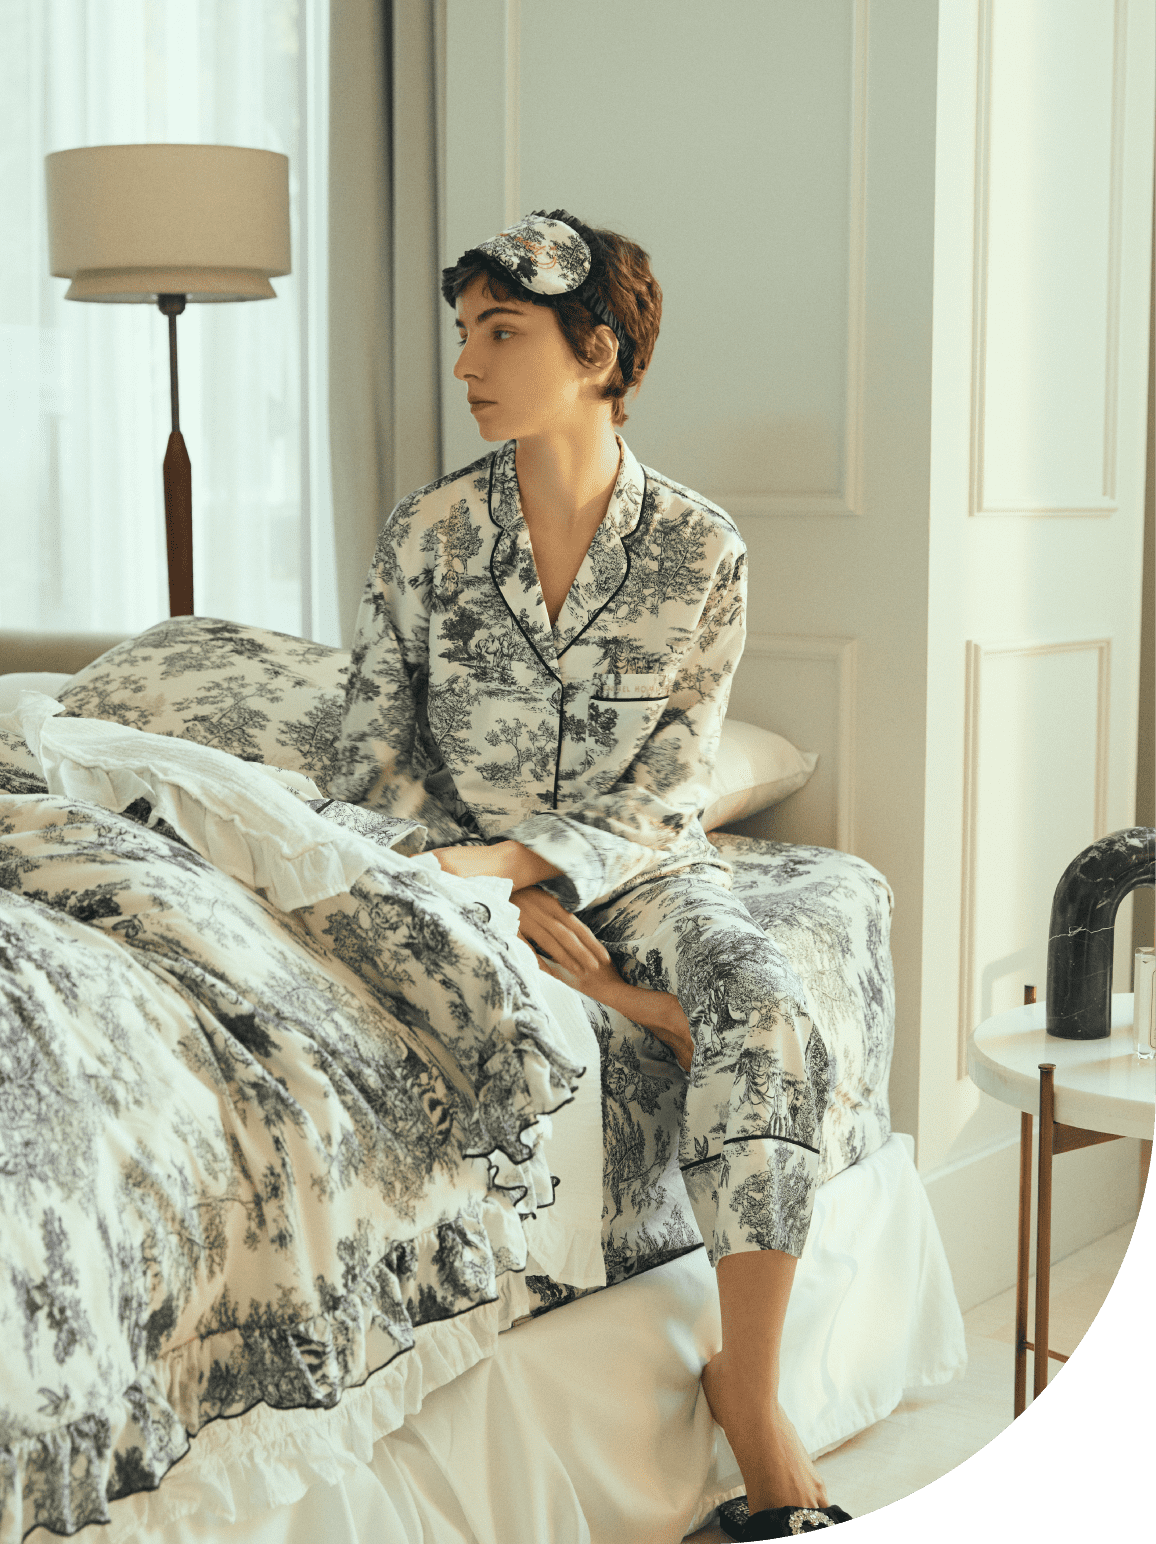 TOILE de JOUY Collection | SNIDEL HOME（スナイデルホーム）公式サイト